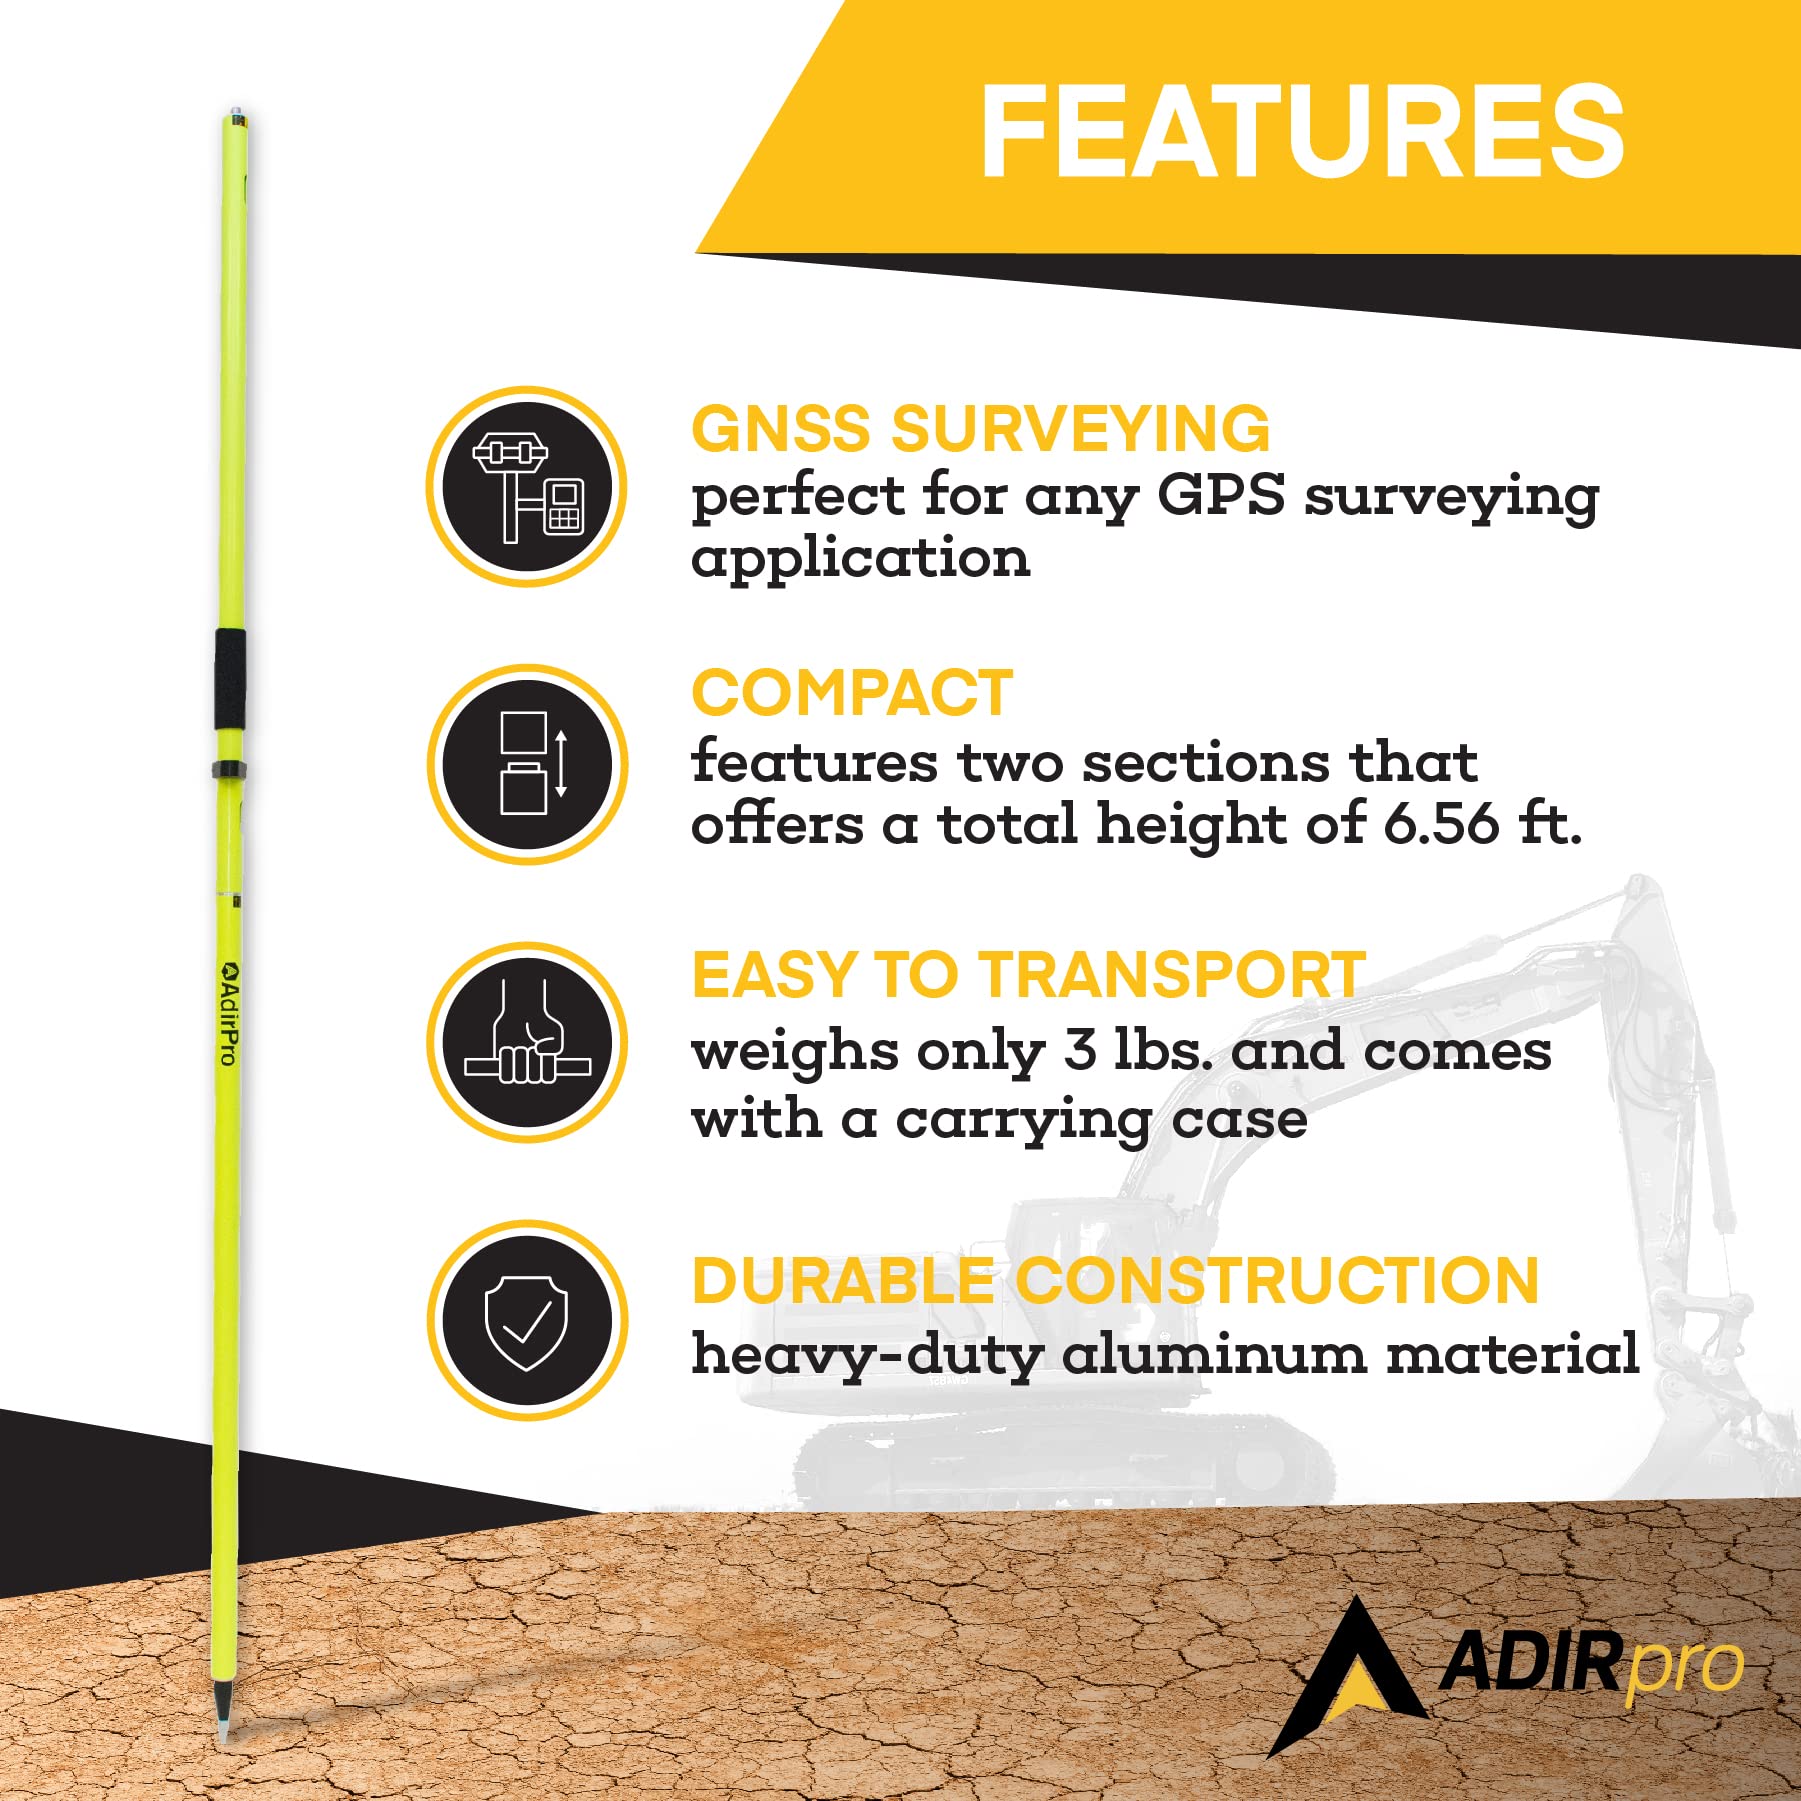 AdirPro 2m Two-Piece GPS Rover Rod – Lightweight & Accurate Aluminum Surveying Rod w/Replaceable Metal Tip – For Professional & Personal Use  - Like New